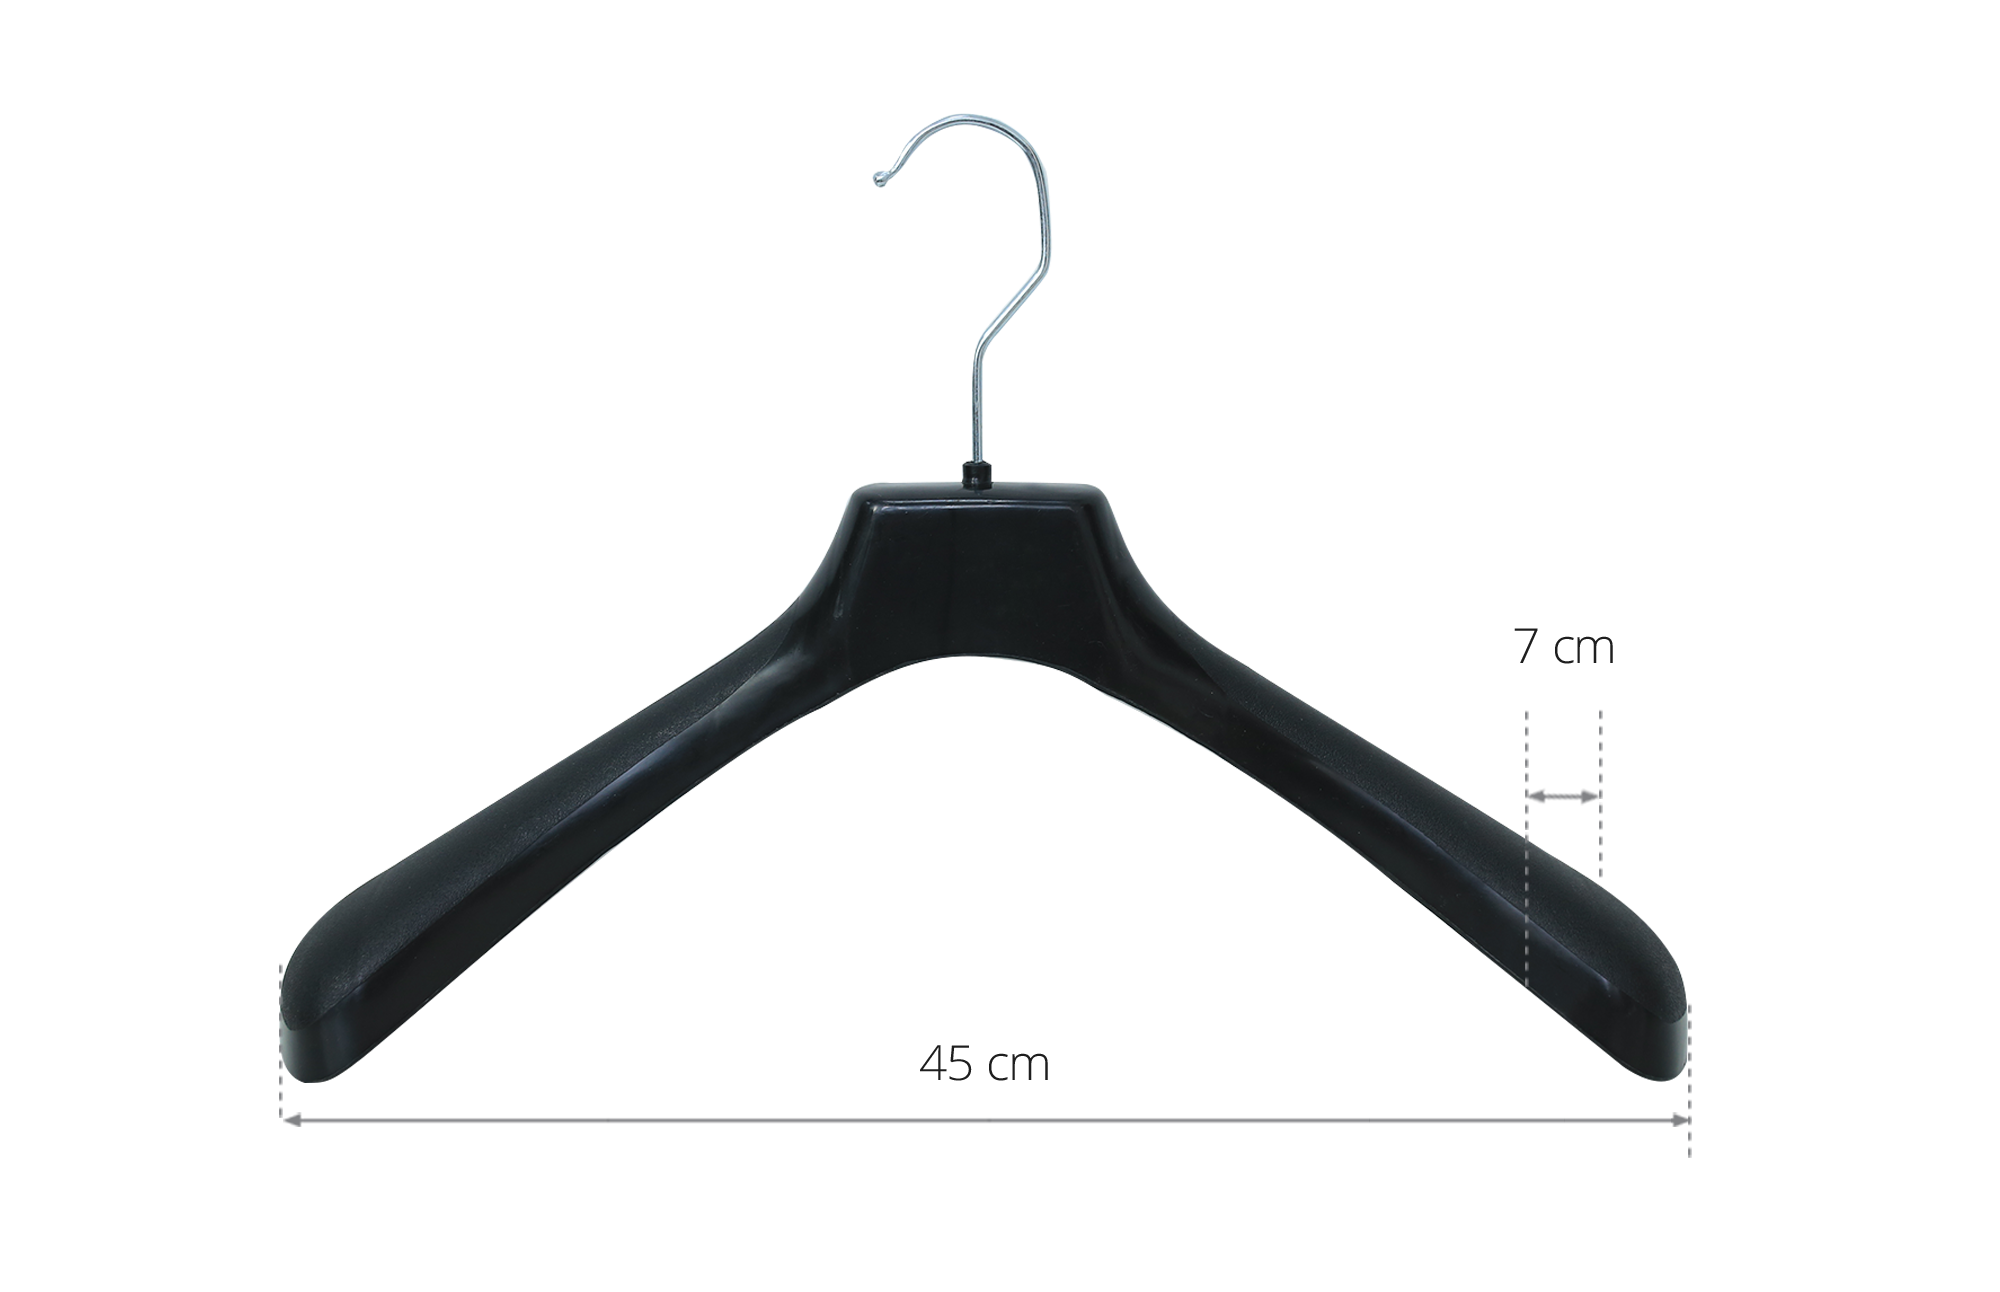 Hangers For Cloths Fast Delivery Suntex Wholesale Plastic Hangers Competitive Price Customized Anti-Slip Made In Vietnam 4